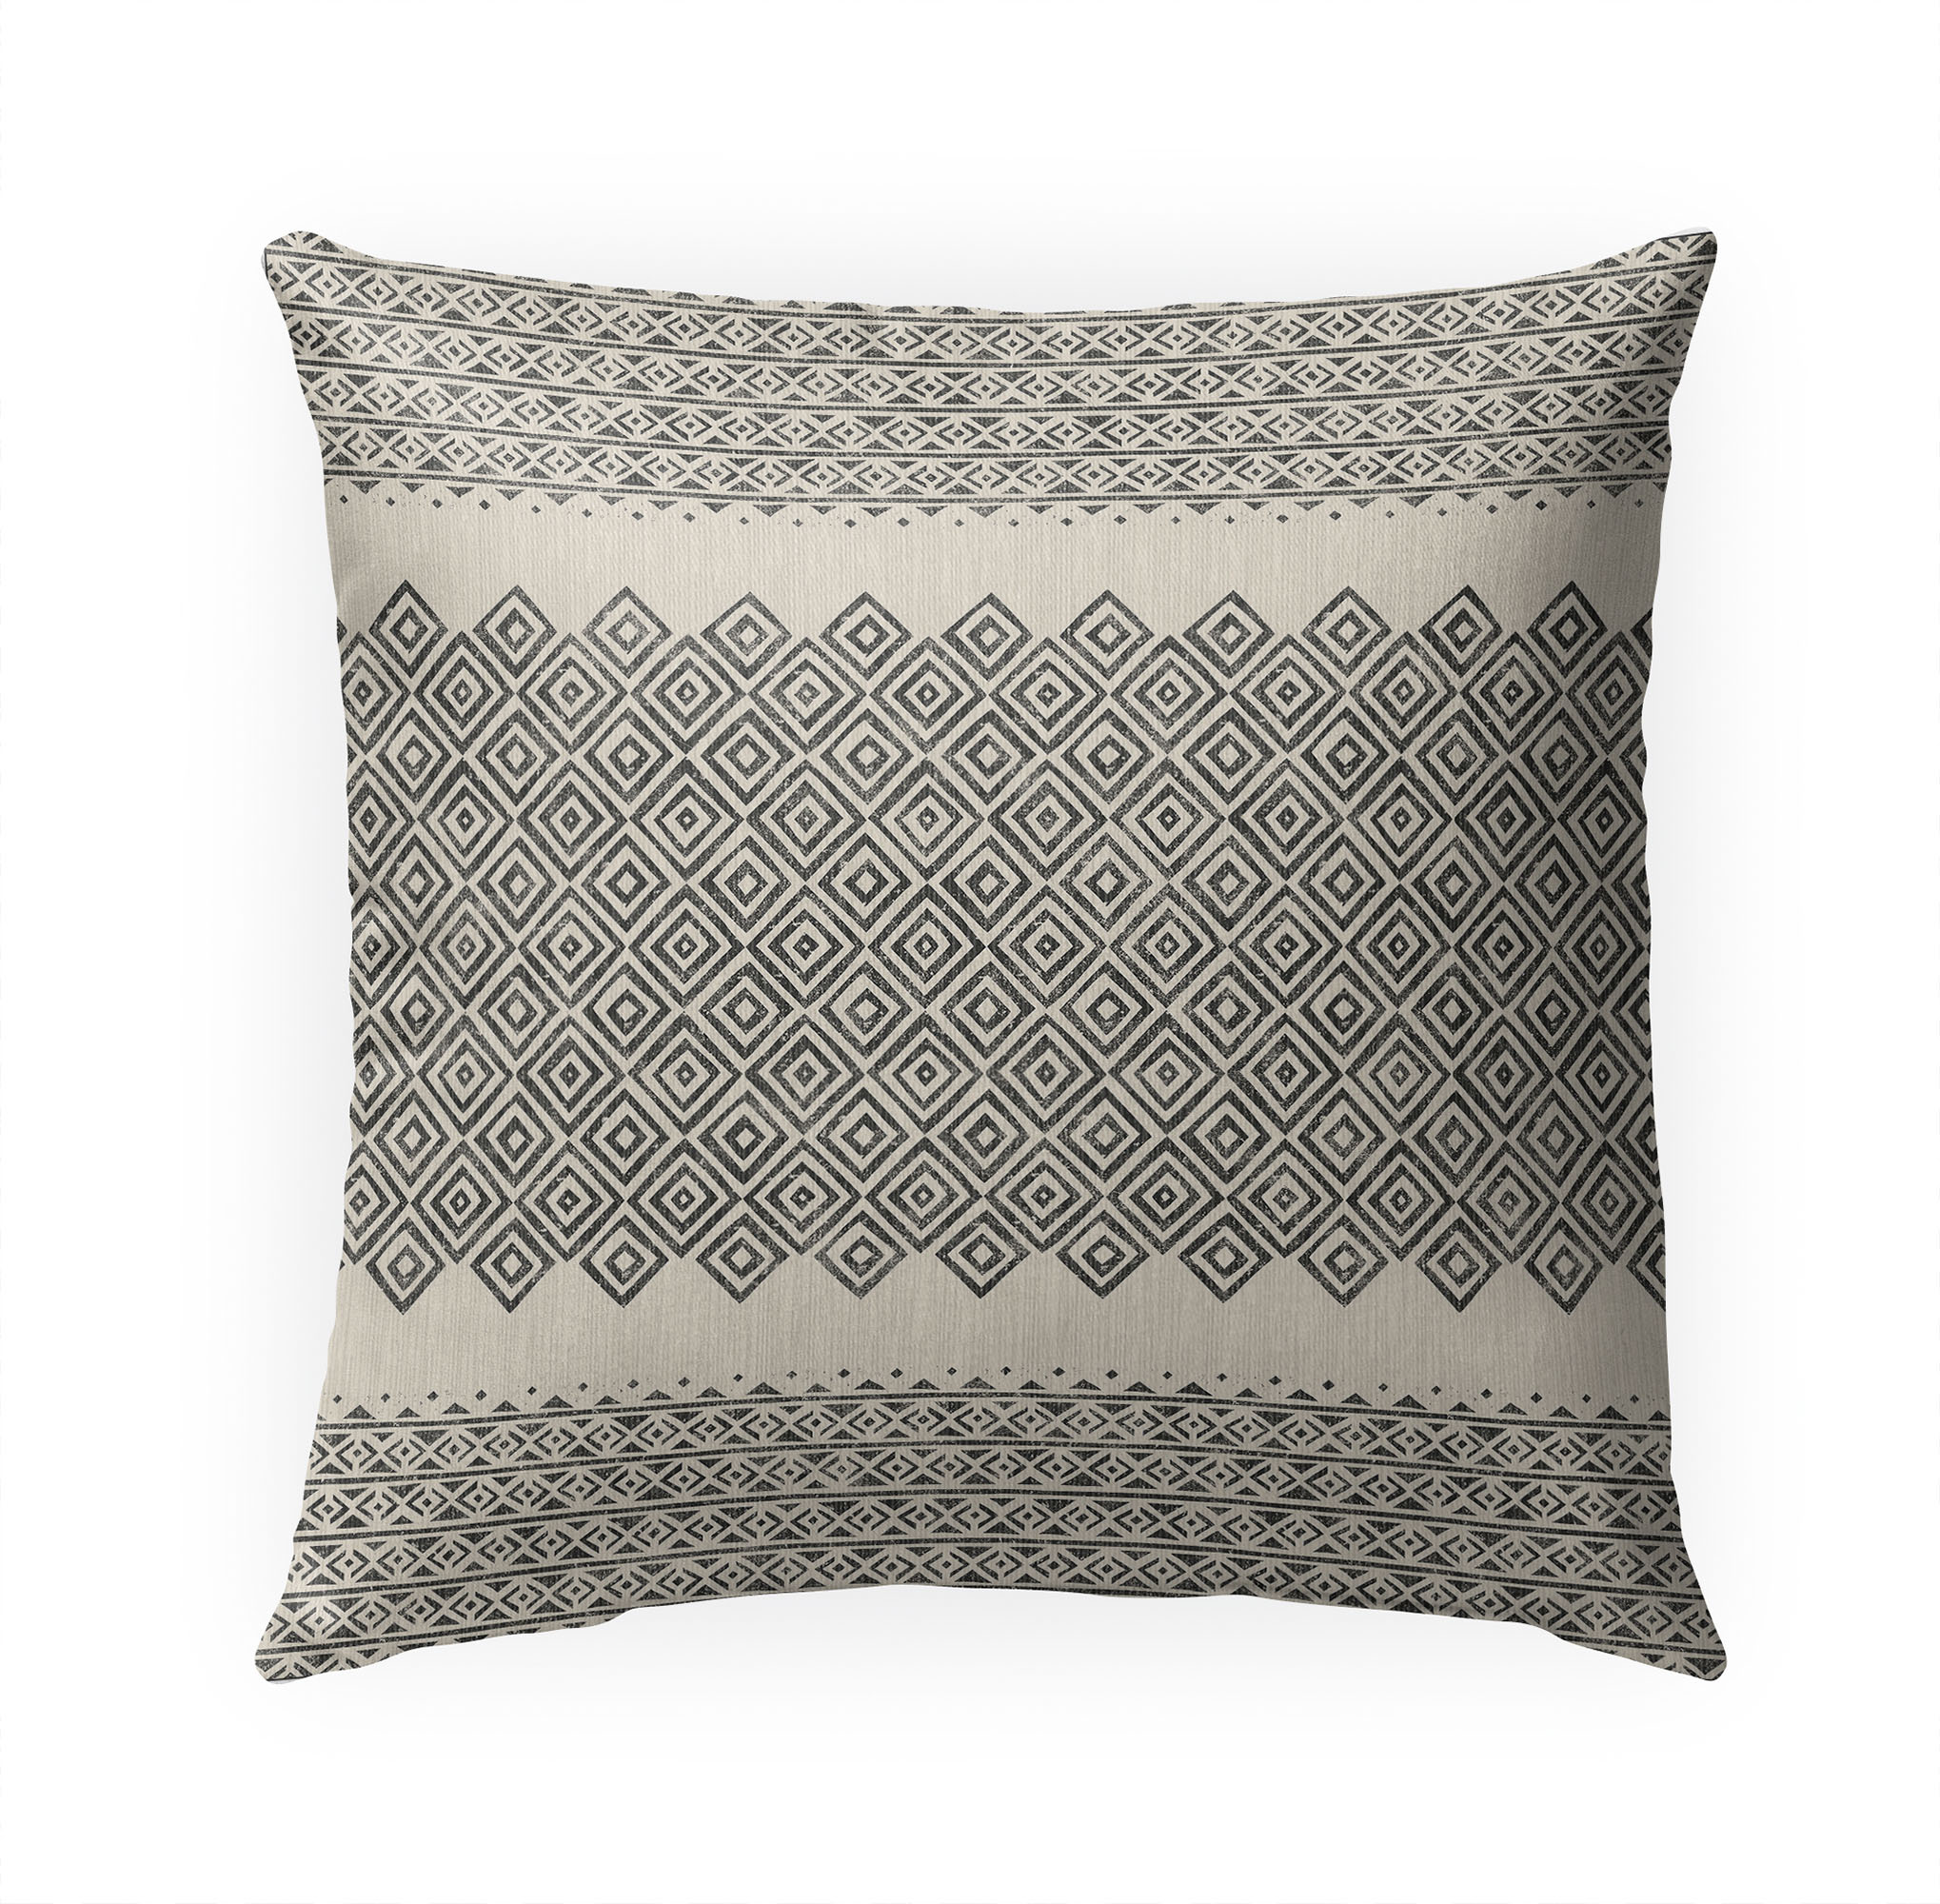 Uma Beige Outdoor Pillow by Kavka Designs - image 1 of 5